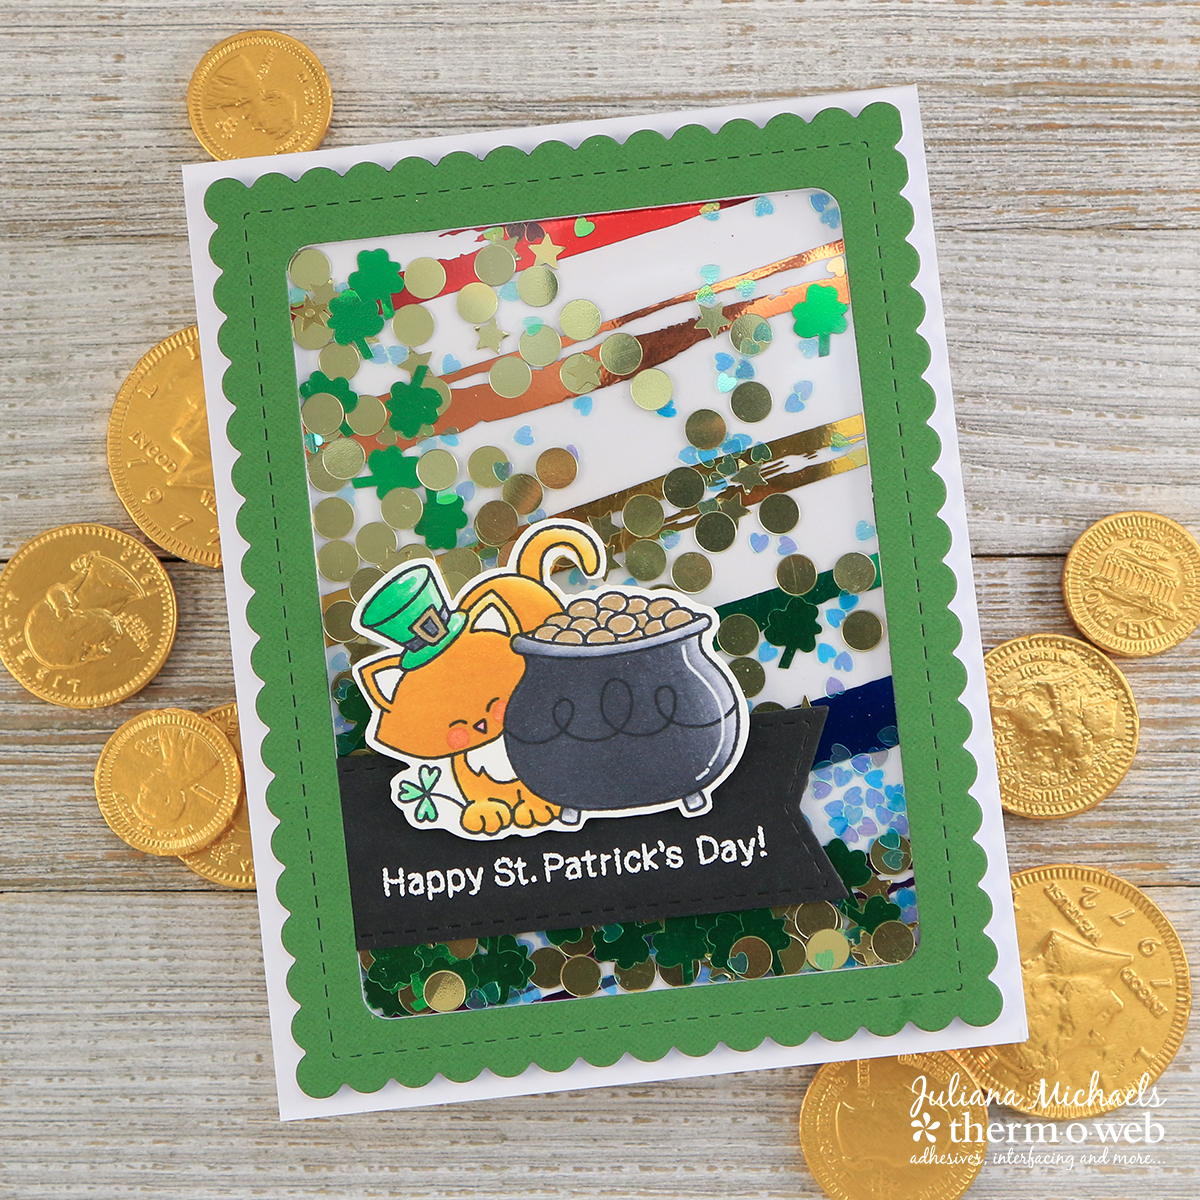 St. Patrick's Day Rainbow Shaker Card by Juliana Michaels featuring Therm O Web Deco Foil, Designer Transfer Sheets and Newton's Nook Designs Stamps